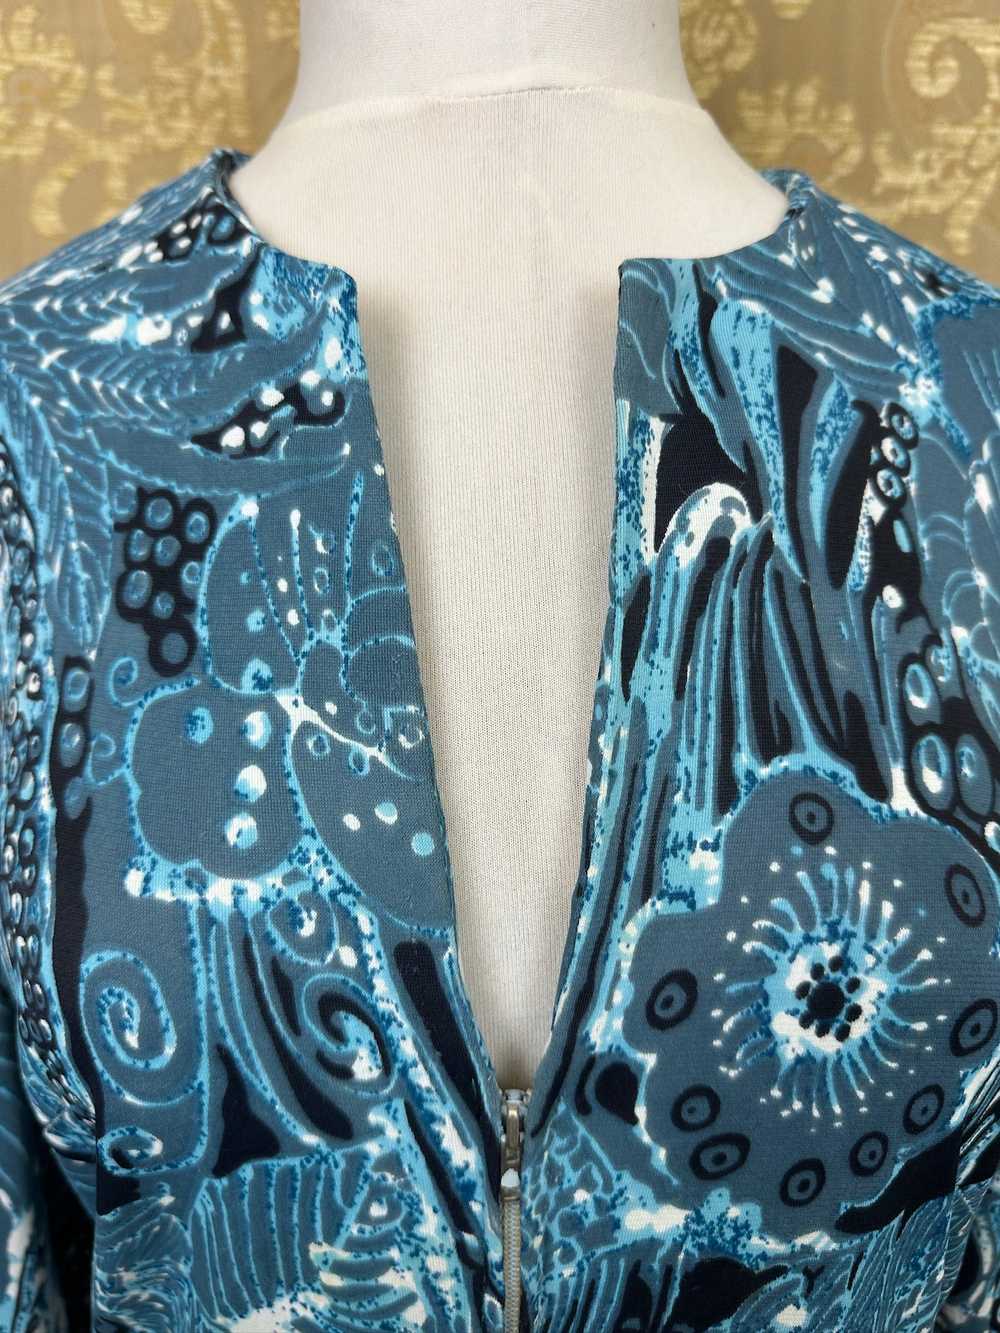 B40” 1970s Homemade Blue Psychedelic Print Maxi D… - image 3